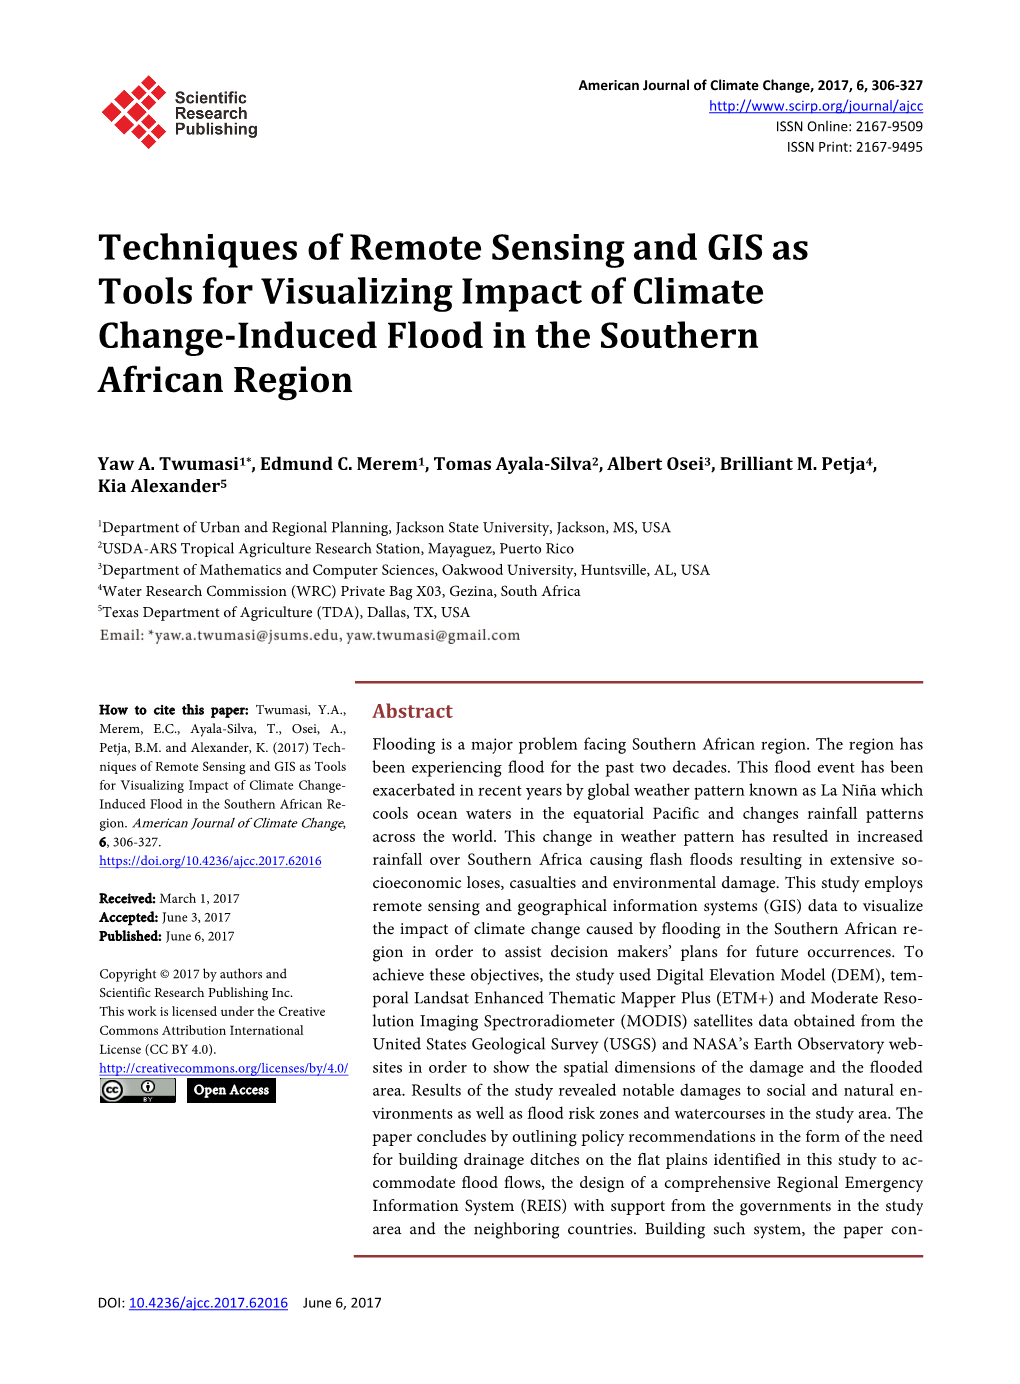 Techniques of Remote Sensing and GIS As Tools for Visualizing Impact of Climate Change-Induced Flood in the Southern African Region